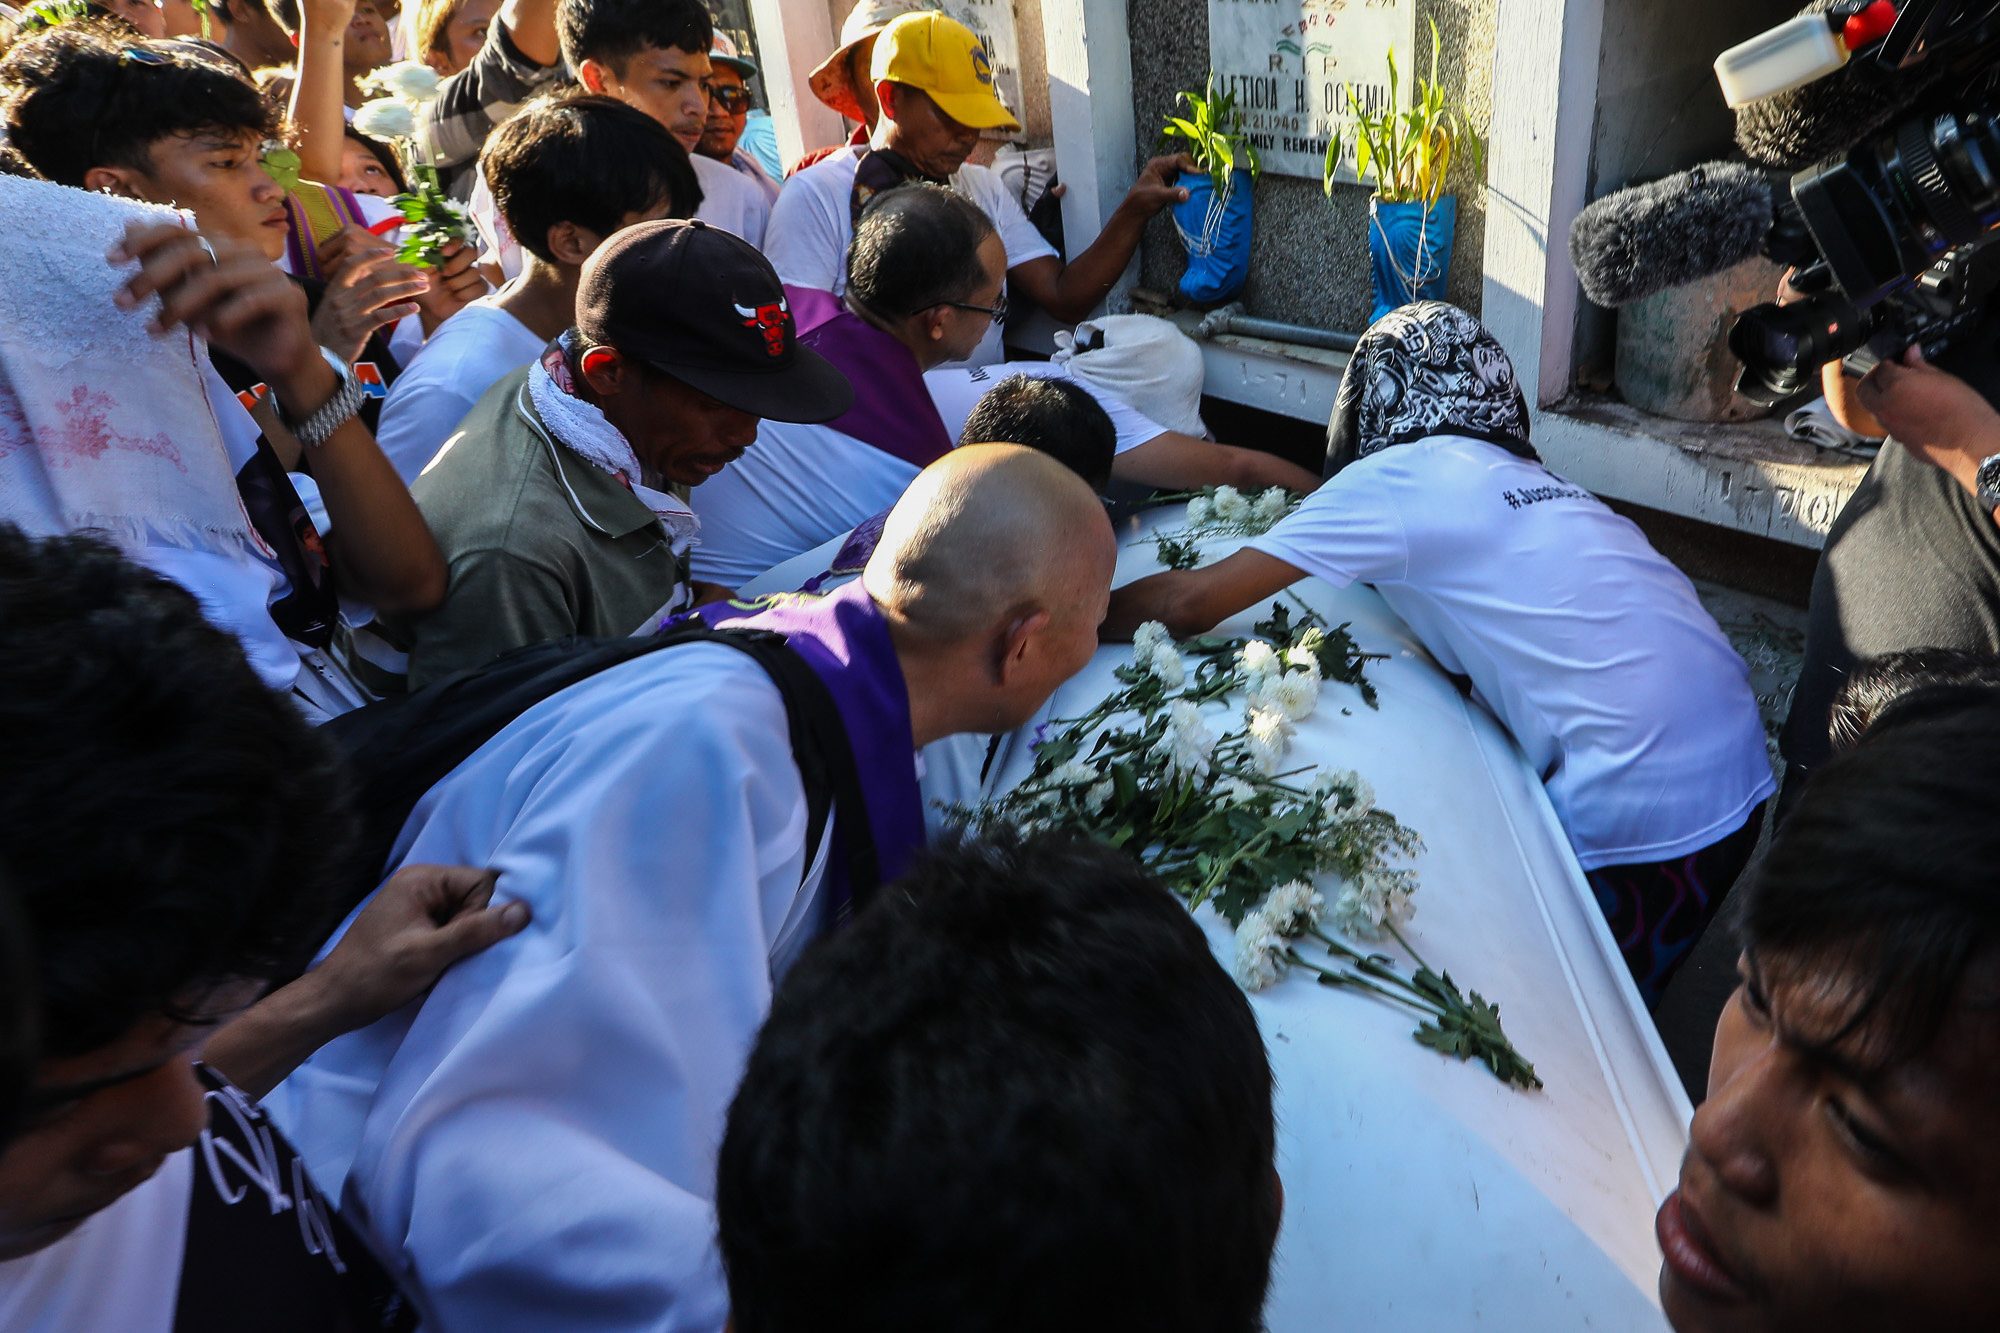 Last farewell for Jemboy Baltazar, the 17-year-old killed by Navotas cops